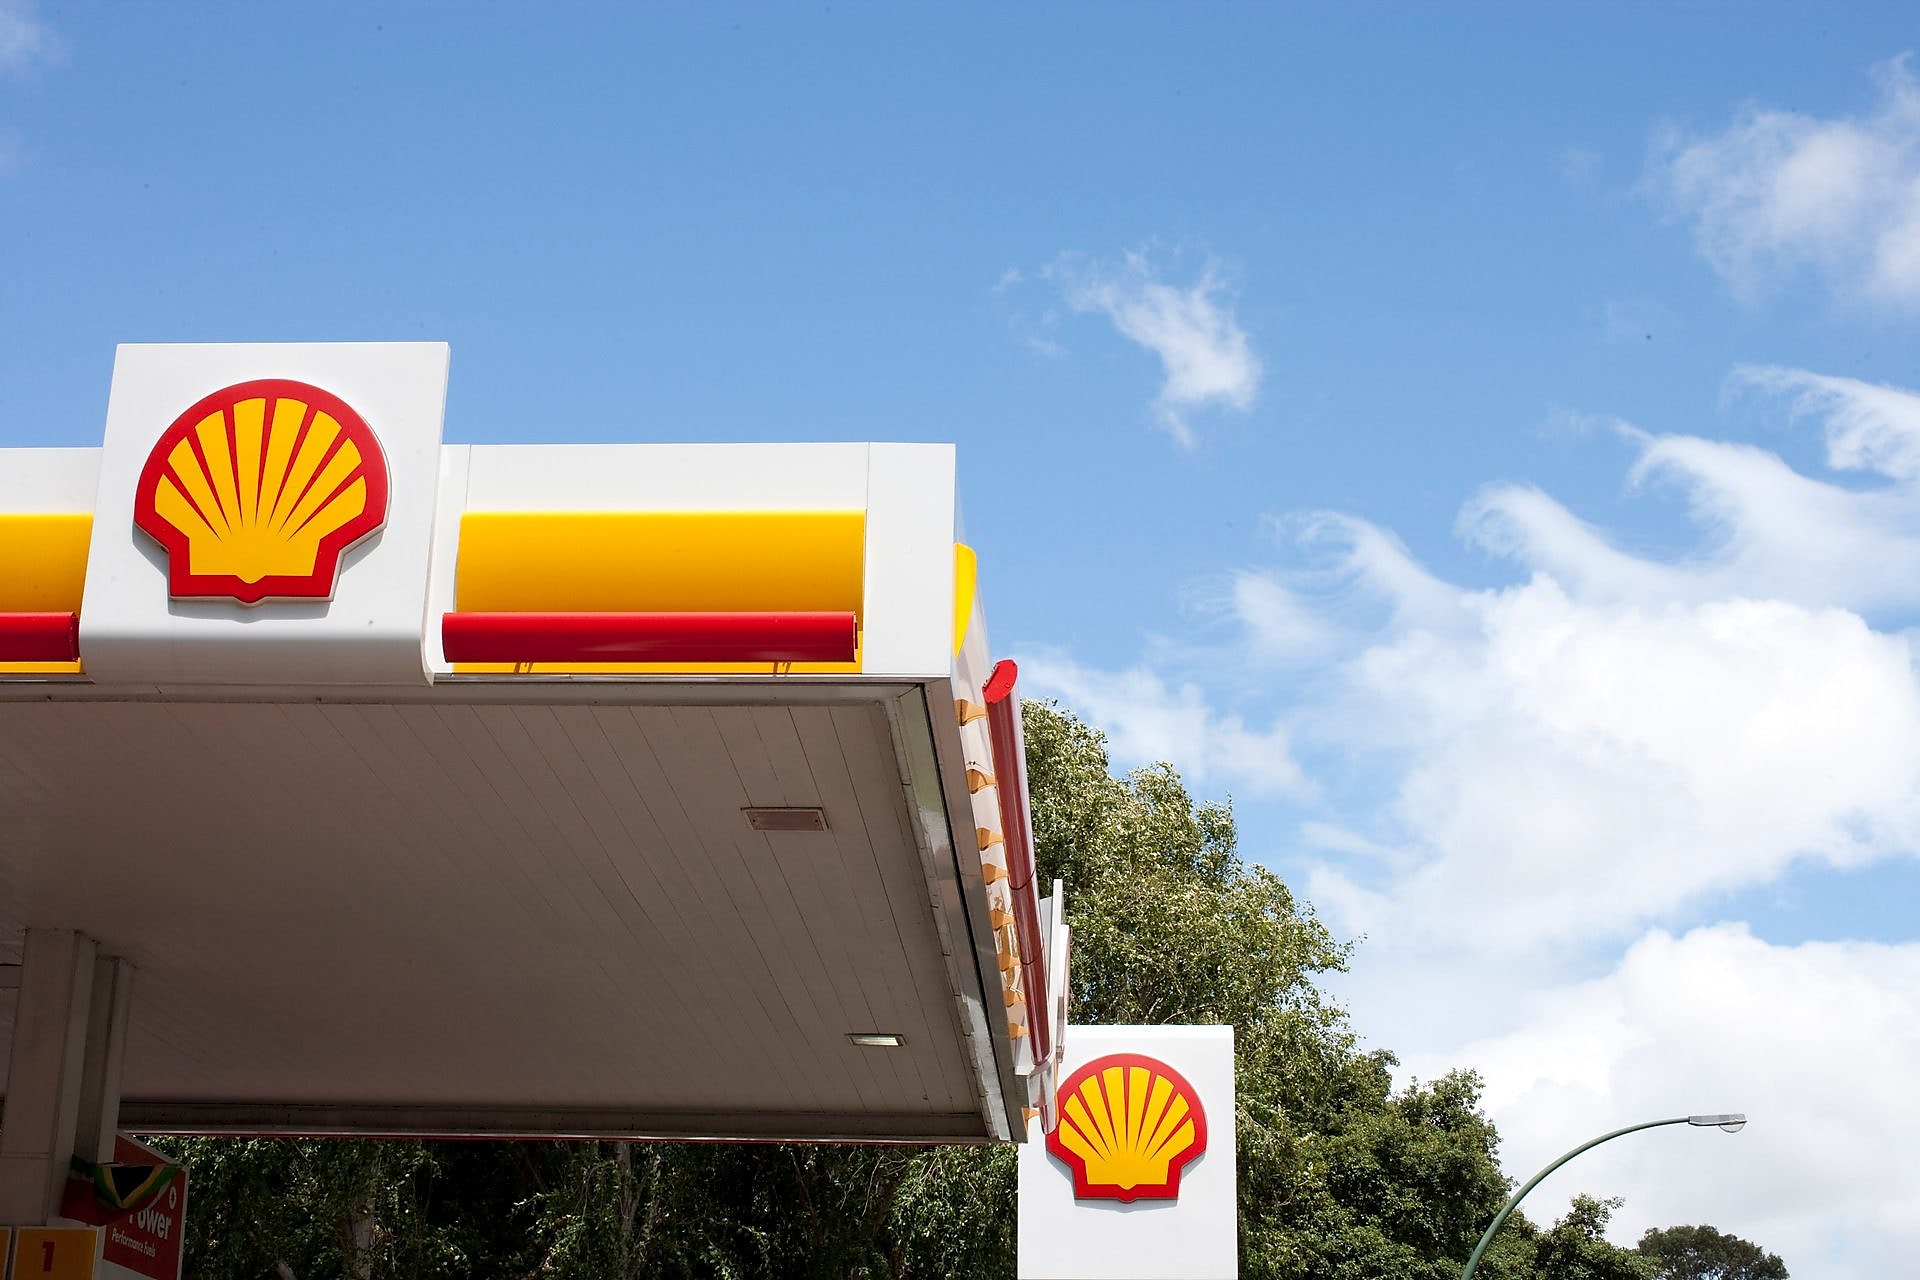 find shell station near me